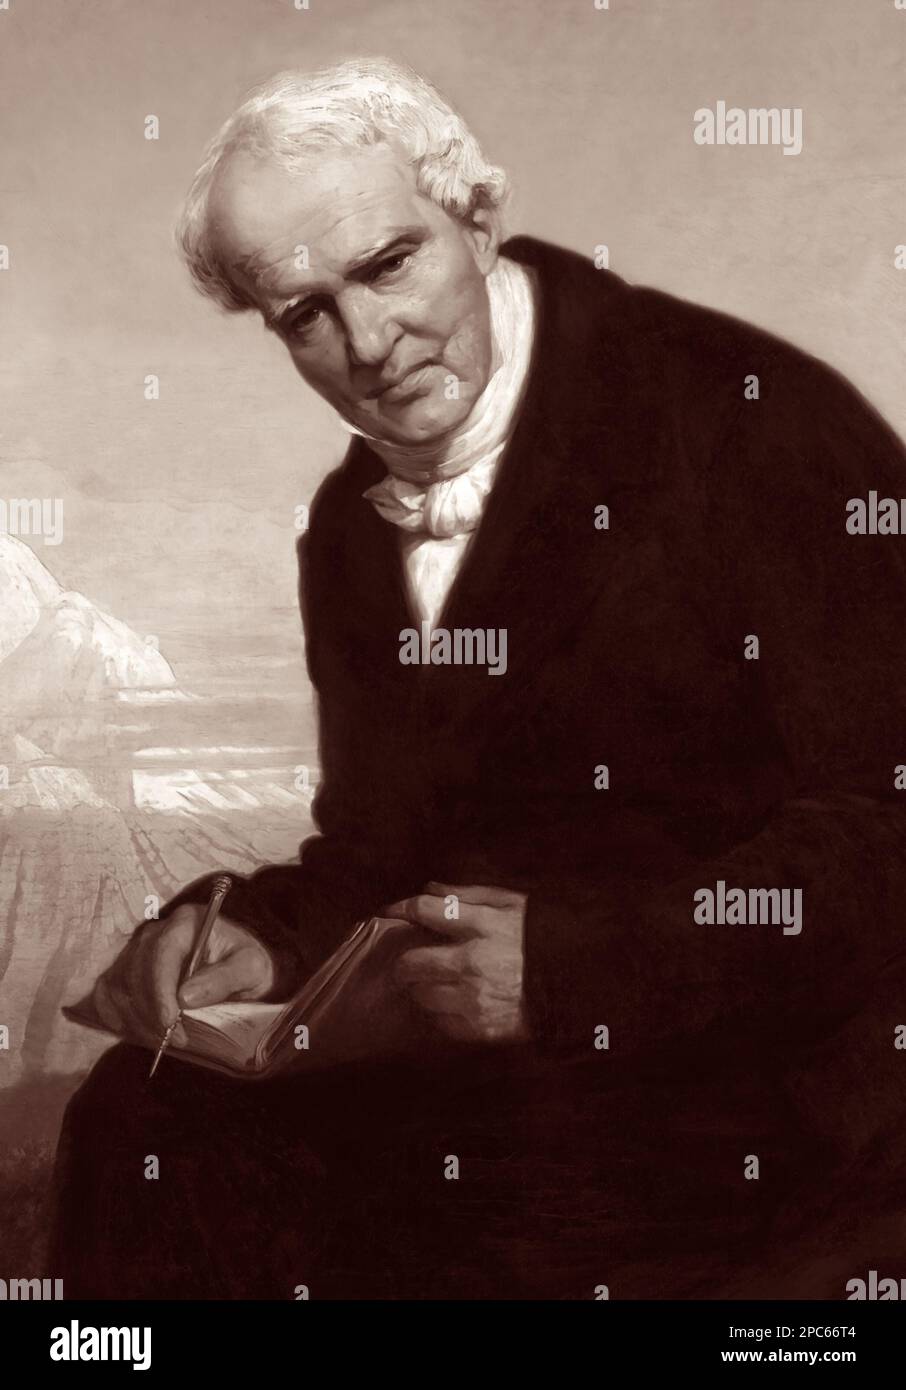 Alexander von Humboldt (1769-1859), influential German naturalist and explorer, was a significant contributor to the scientific fields of physical geography and biogeography in the early to mid 1800s. Stock Photo